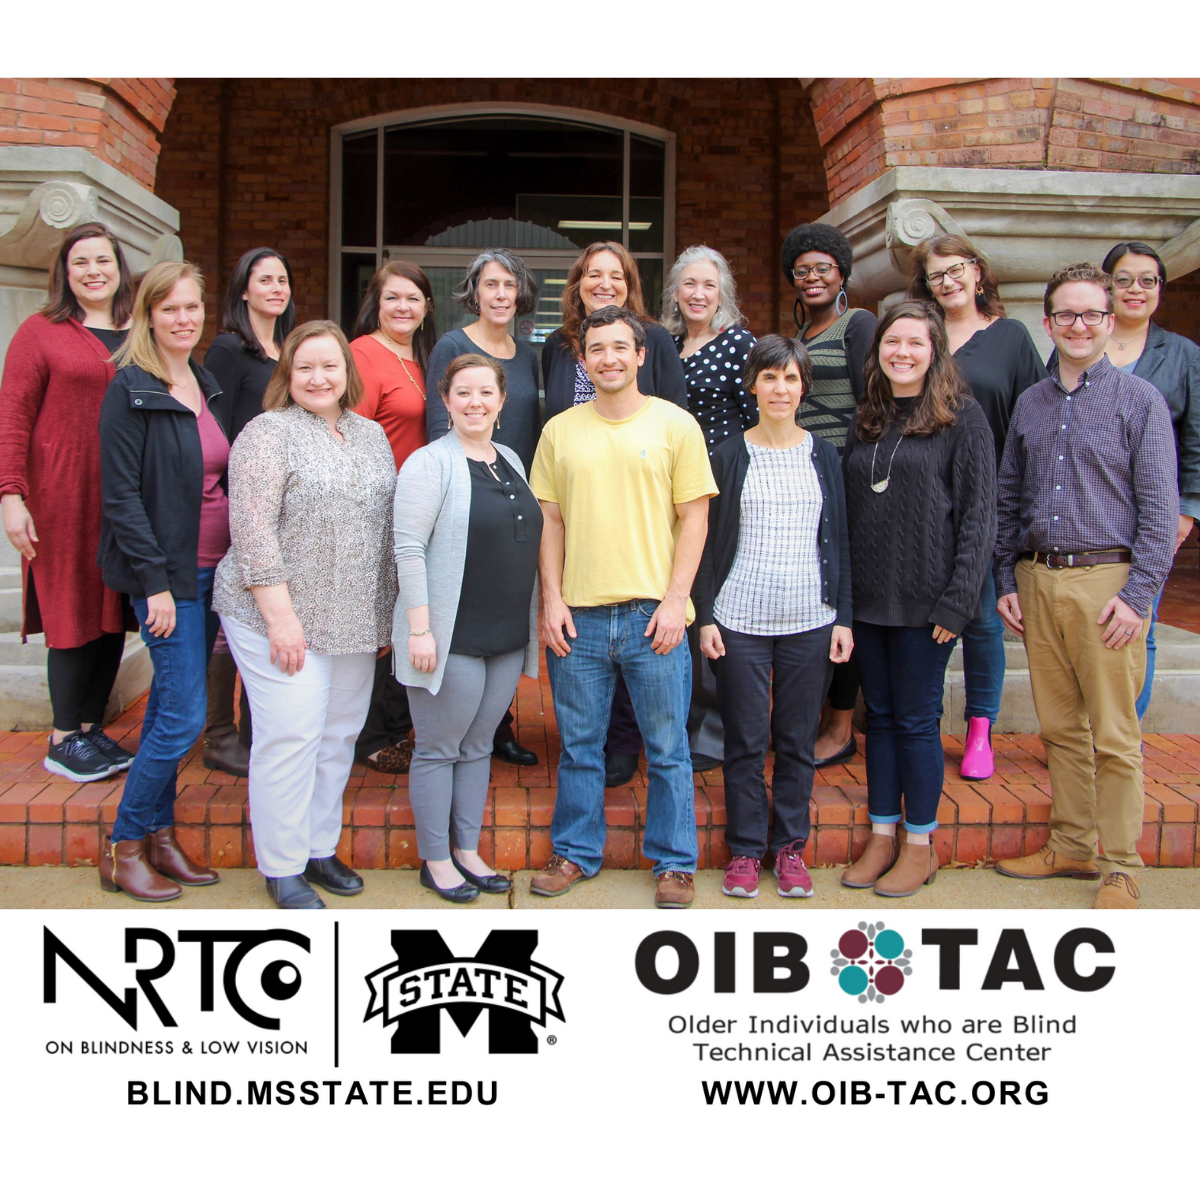 NRTC staff with NRTC and OIB-TAC logos and websites: blind.msstate.edu and www.oib-tac.org